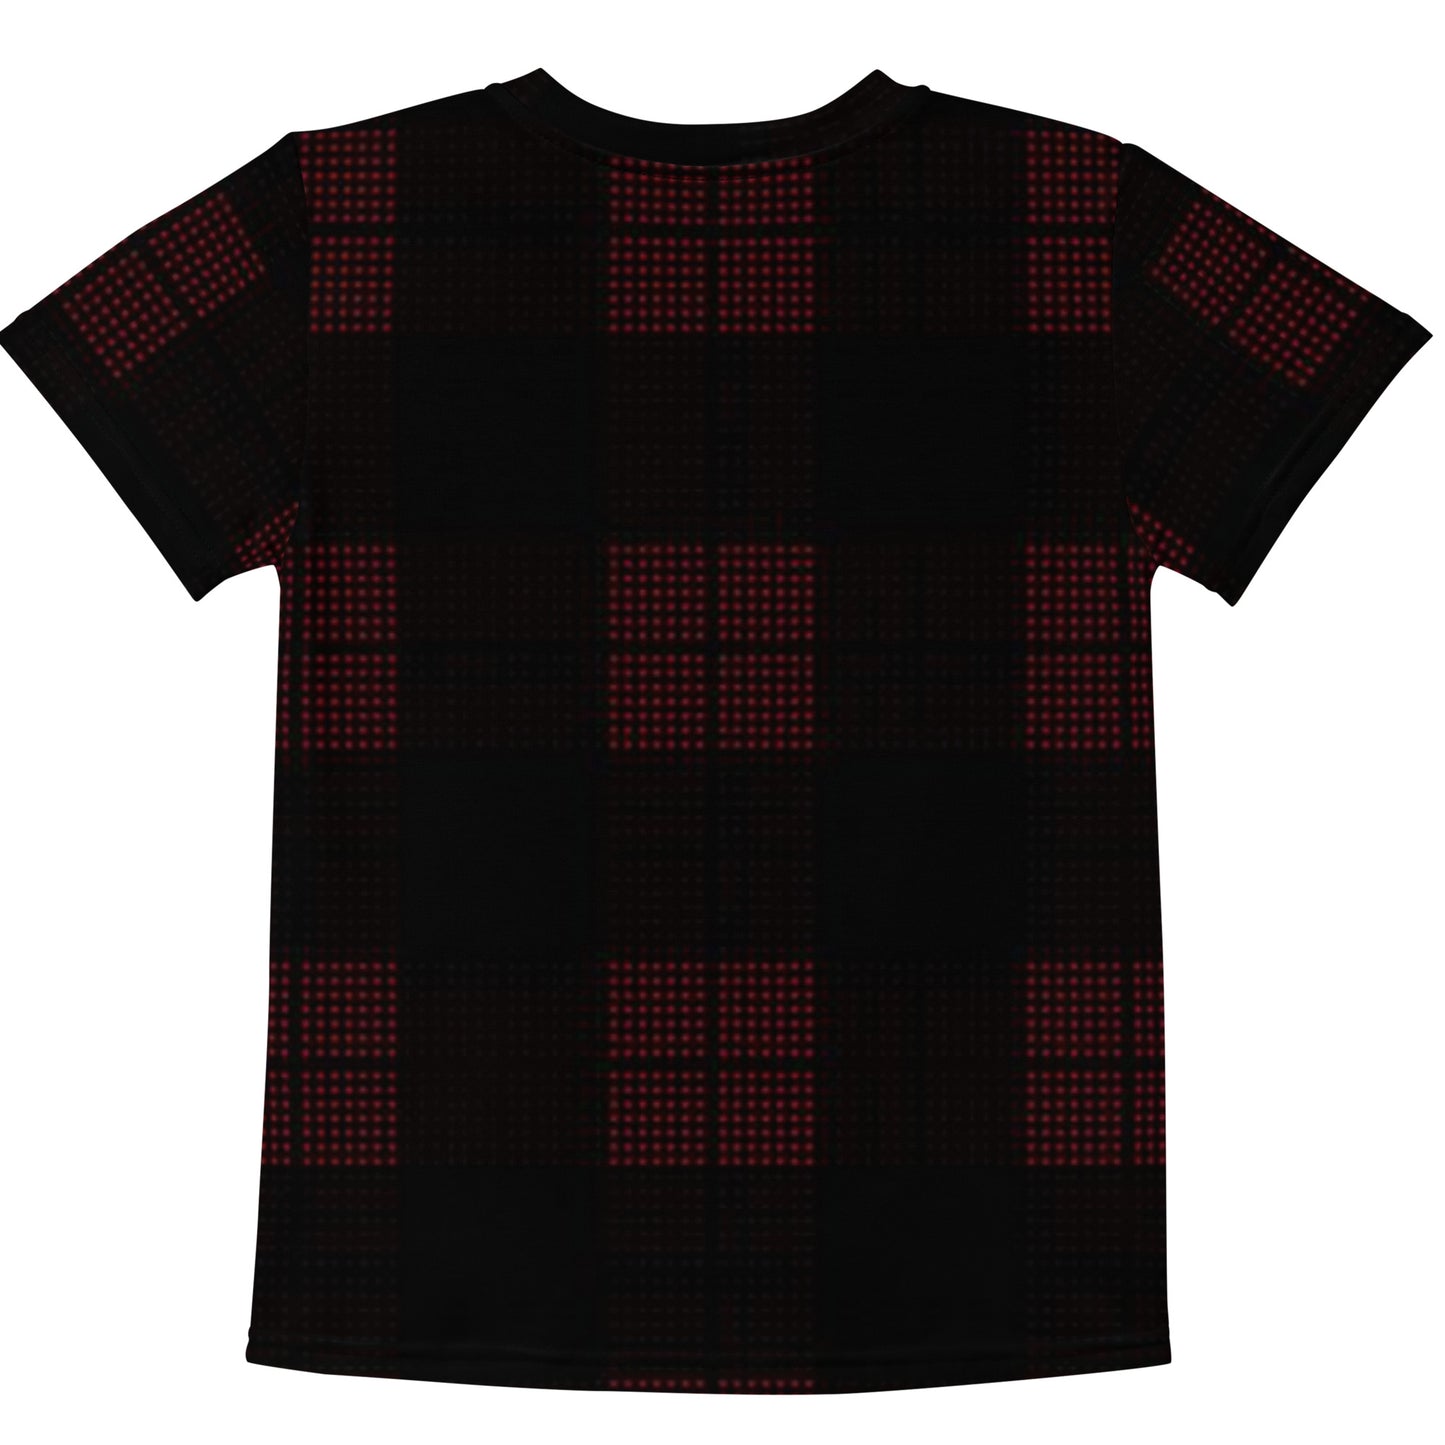 Holiday Kids Tee Set  in Plaid